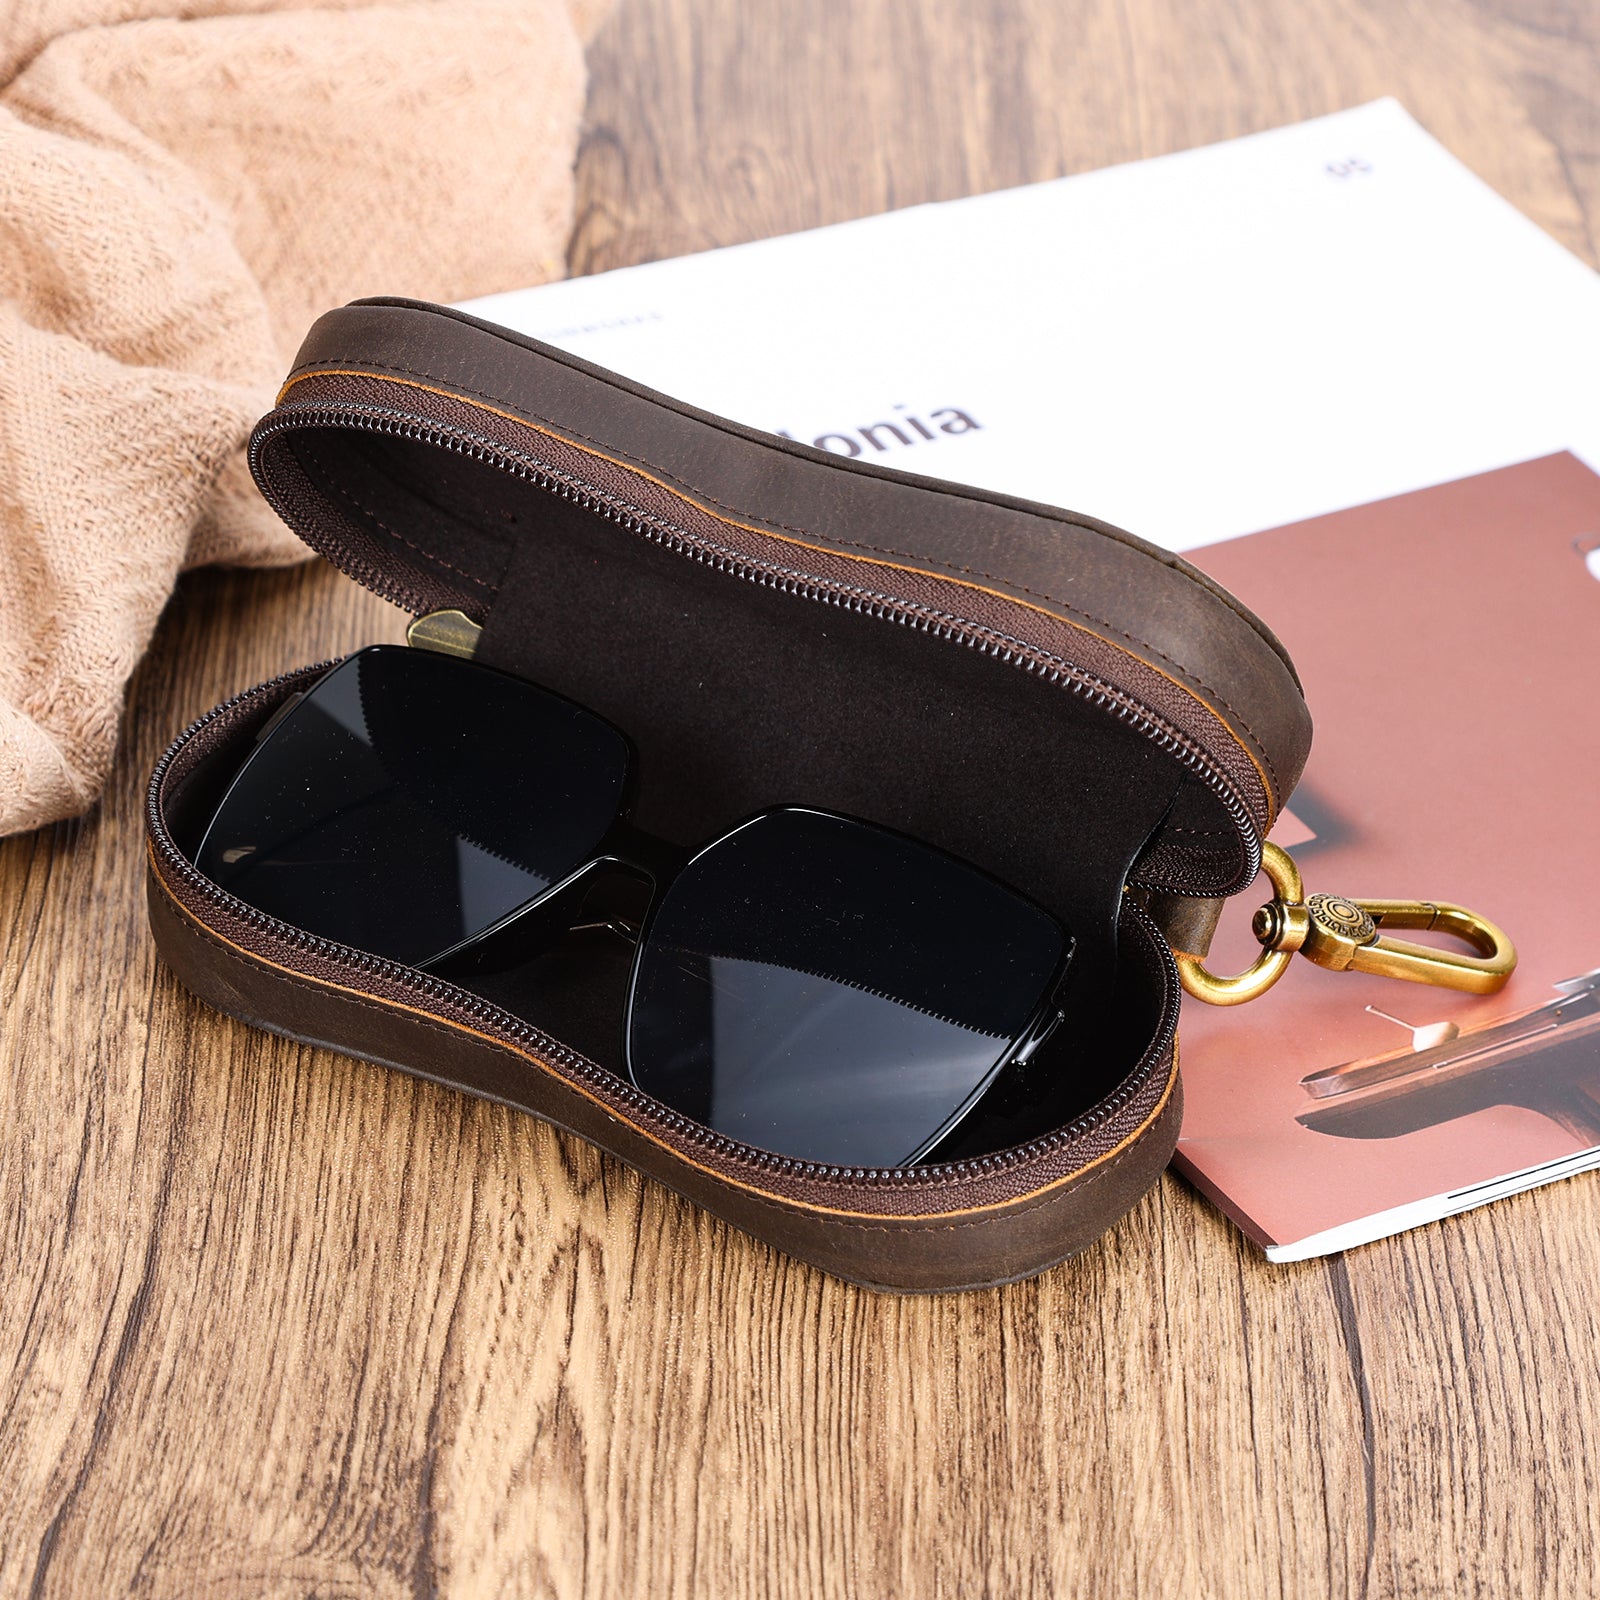 Full Grain Leather Glasses Case Safety Sunglasses Case with YKK Zipper